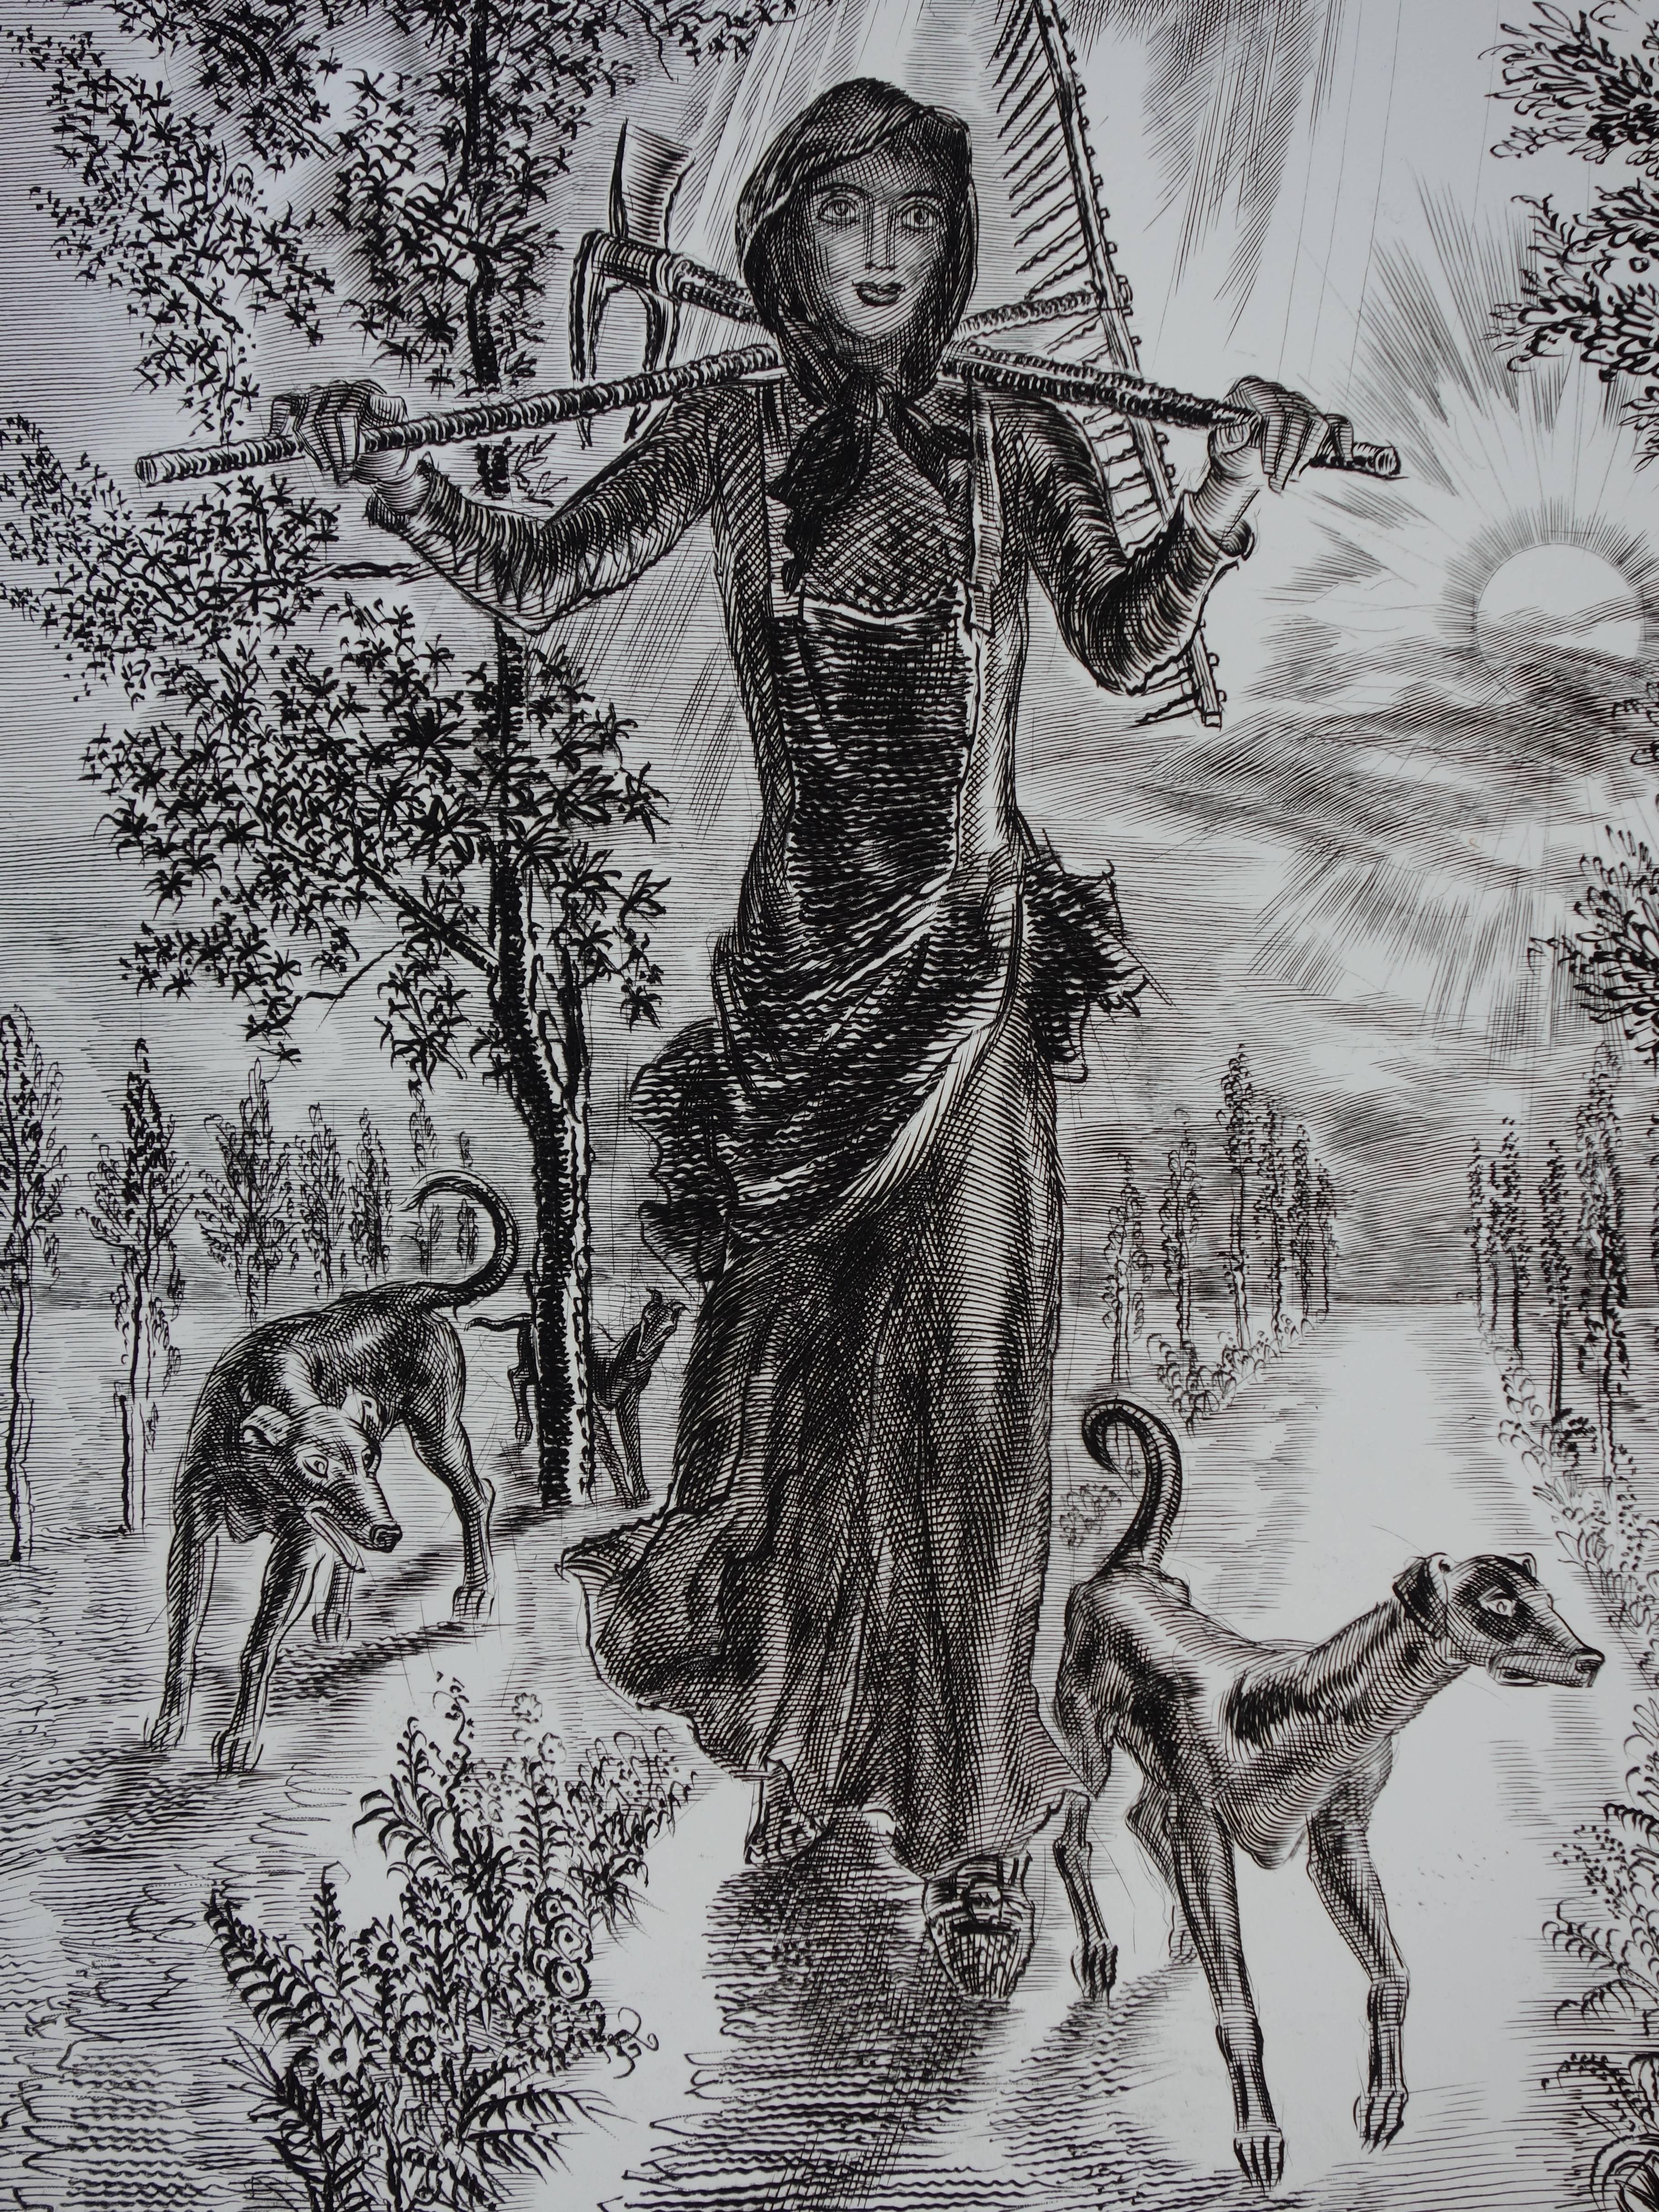 April : Back to the Fields - Original handsigned etching - Exceptional n° 1/100 - Gray Figurative Print by Albert Decaris